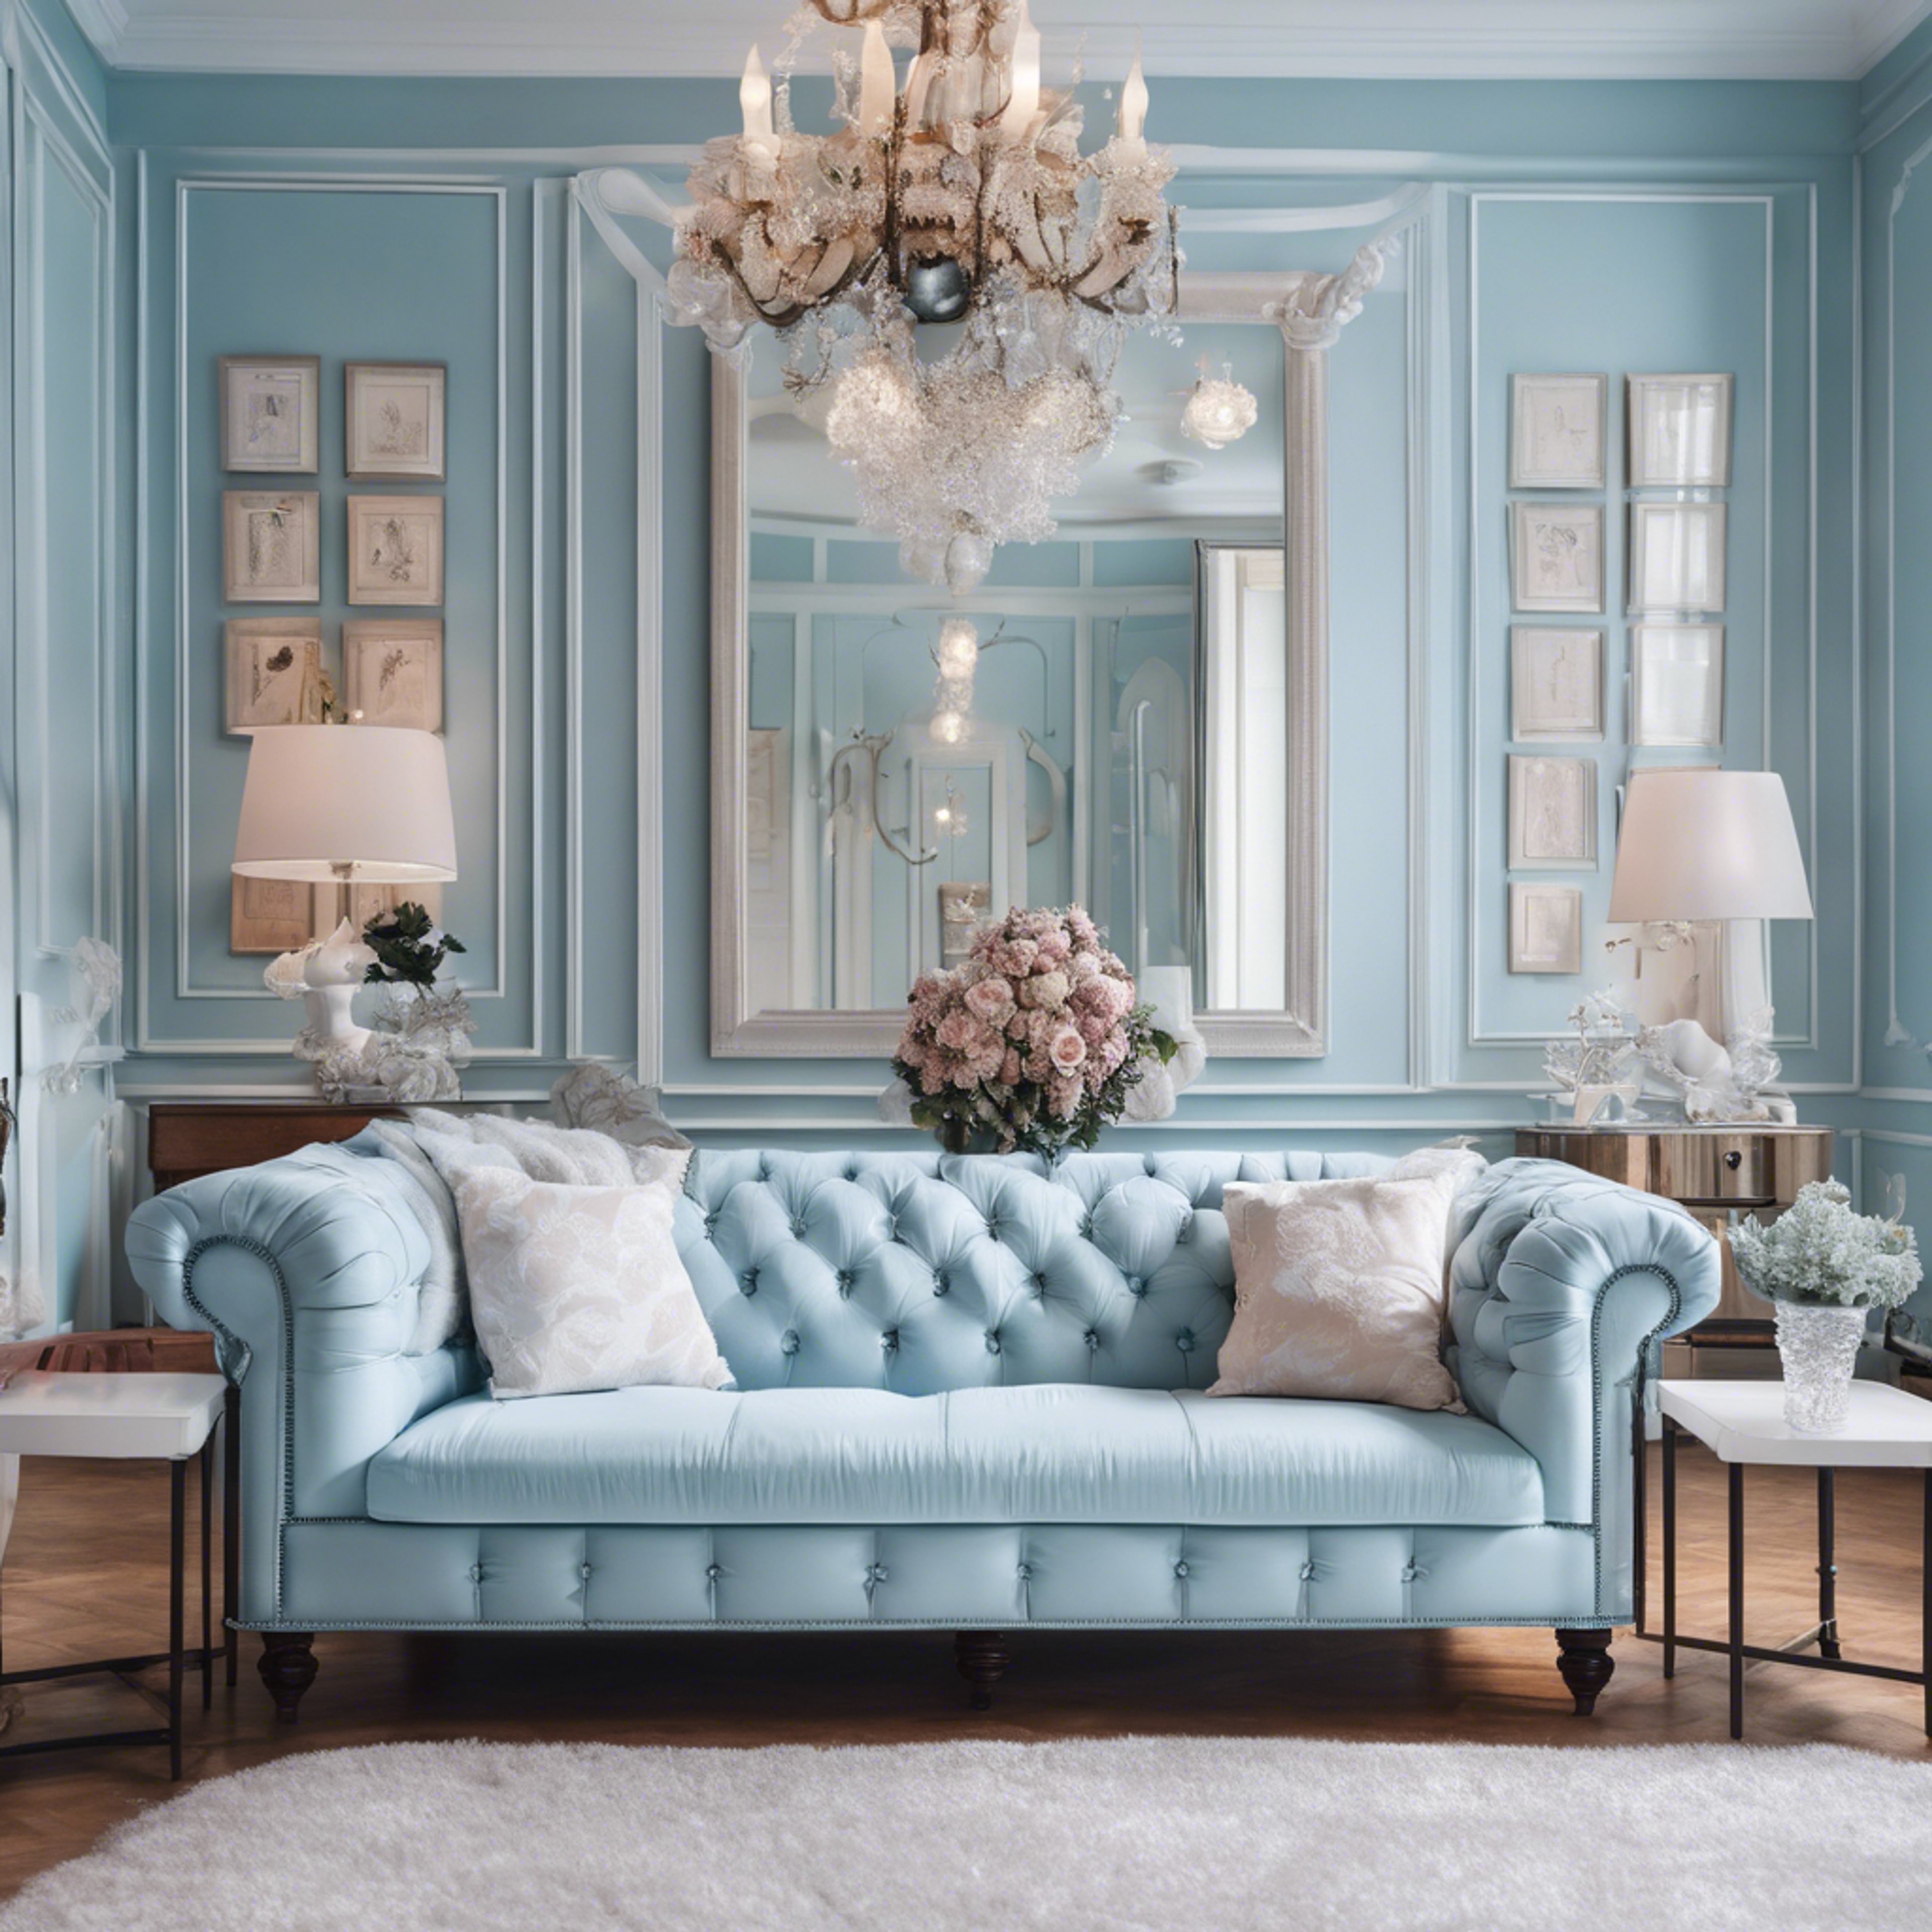 A preppy styled room with pastel blue wallpaper, Chesterfield sofa, and white French style furniture.” 牆紙[3904fac215ba4f1eaa62]